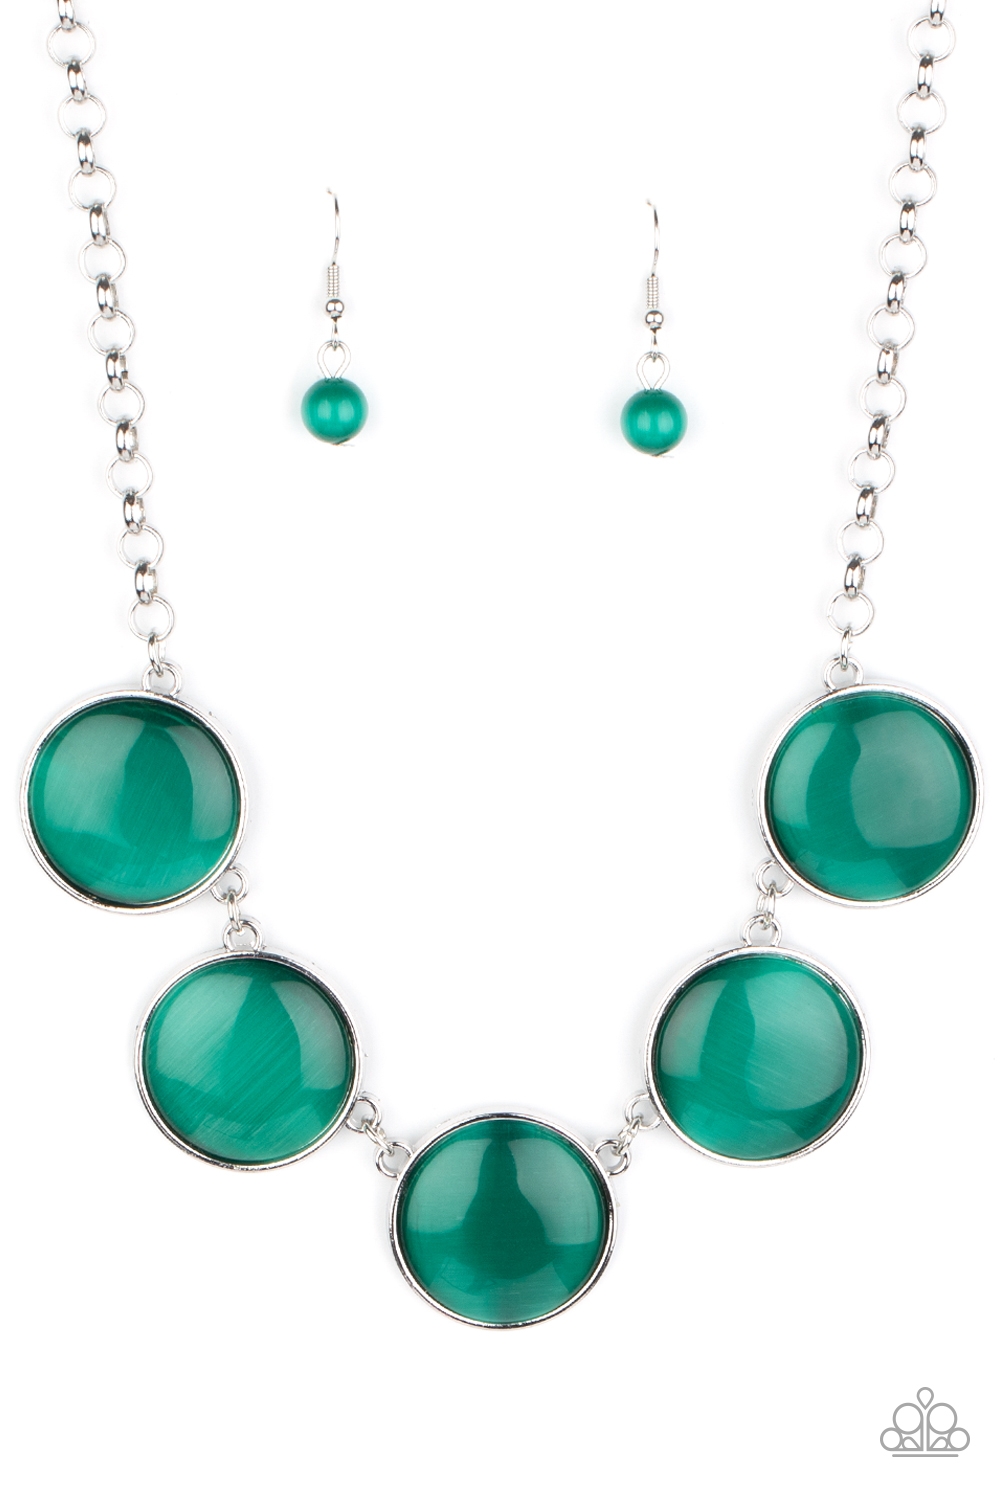 Necklace - Ethereal Escape - Green